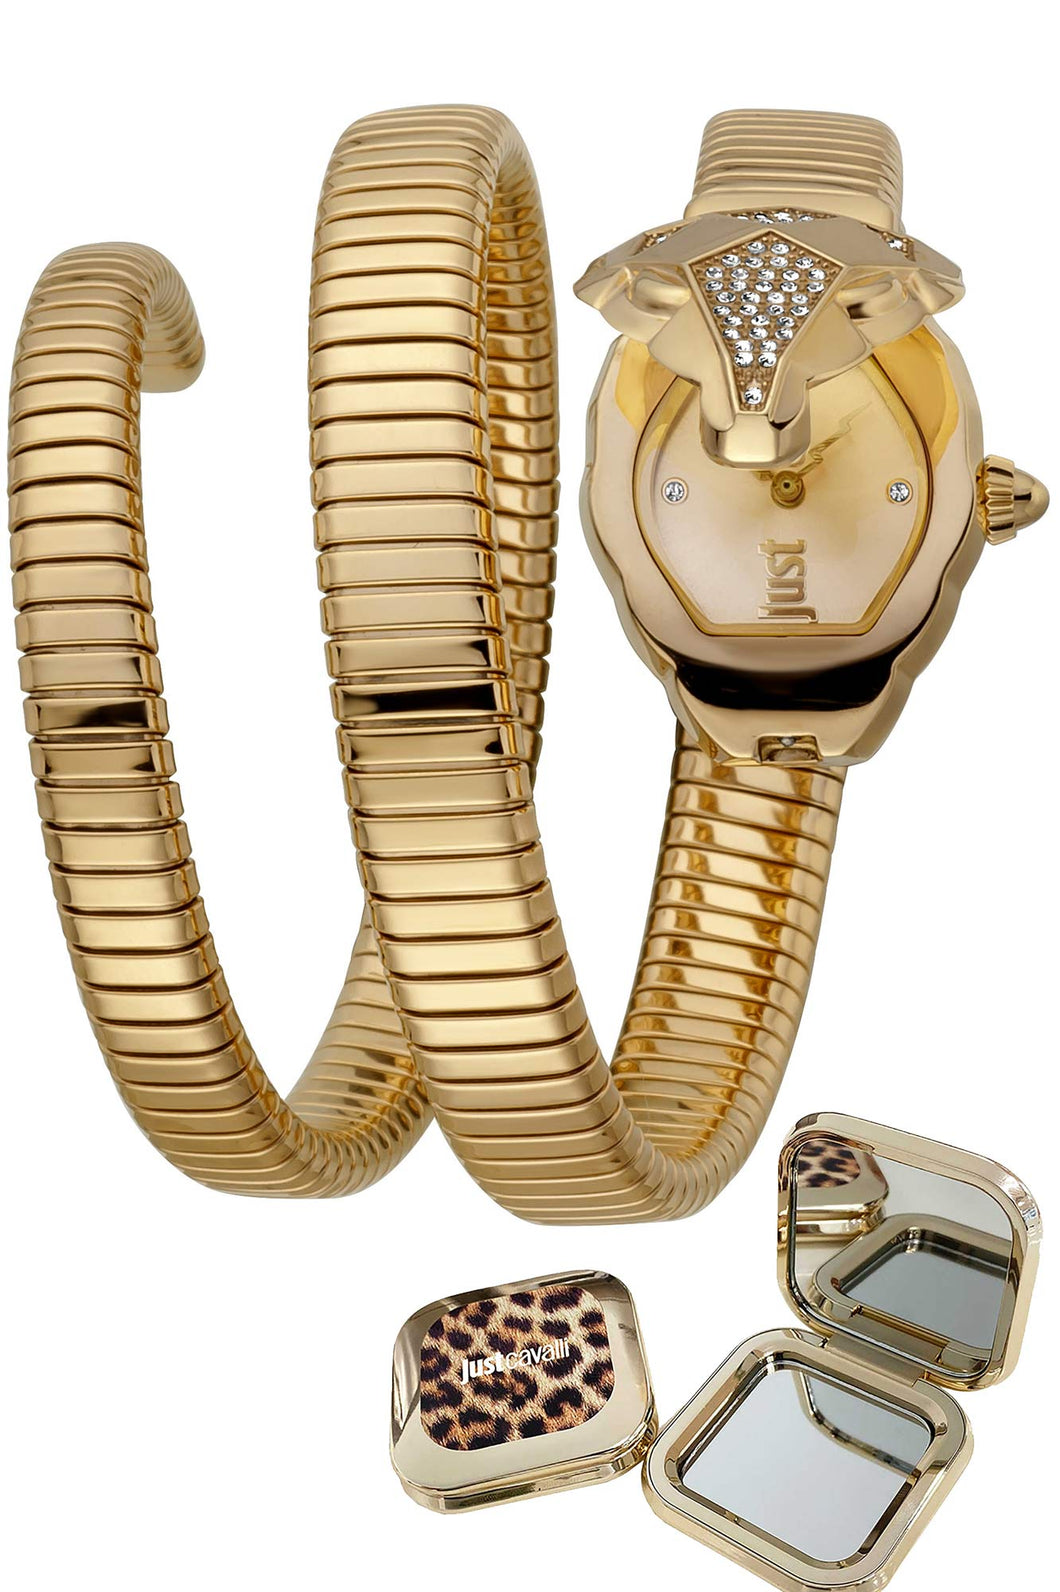 Just Cavalli Time Mod Glam Chic Snake Special Pack + Mirror Gold Watch Gift Set